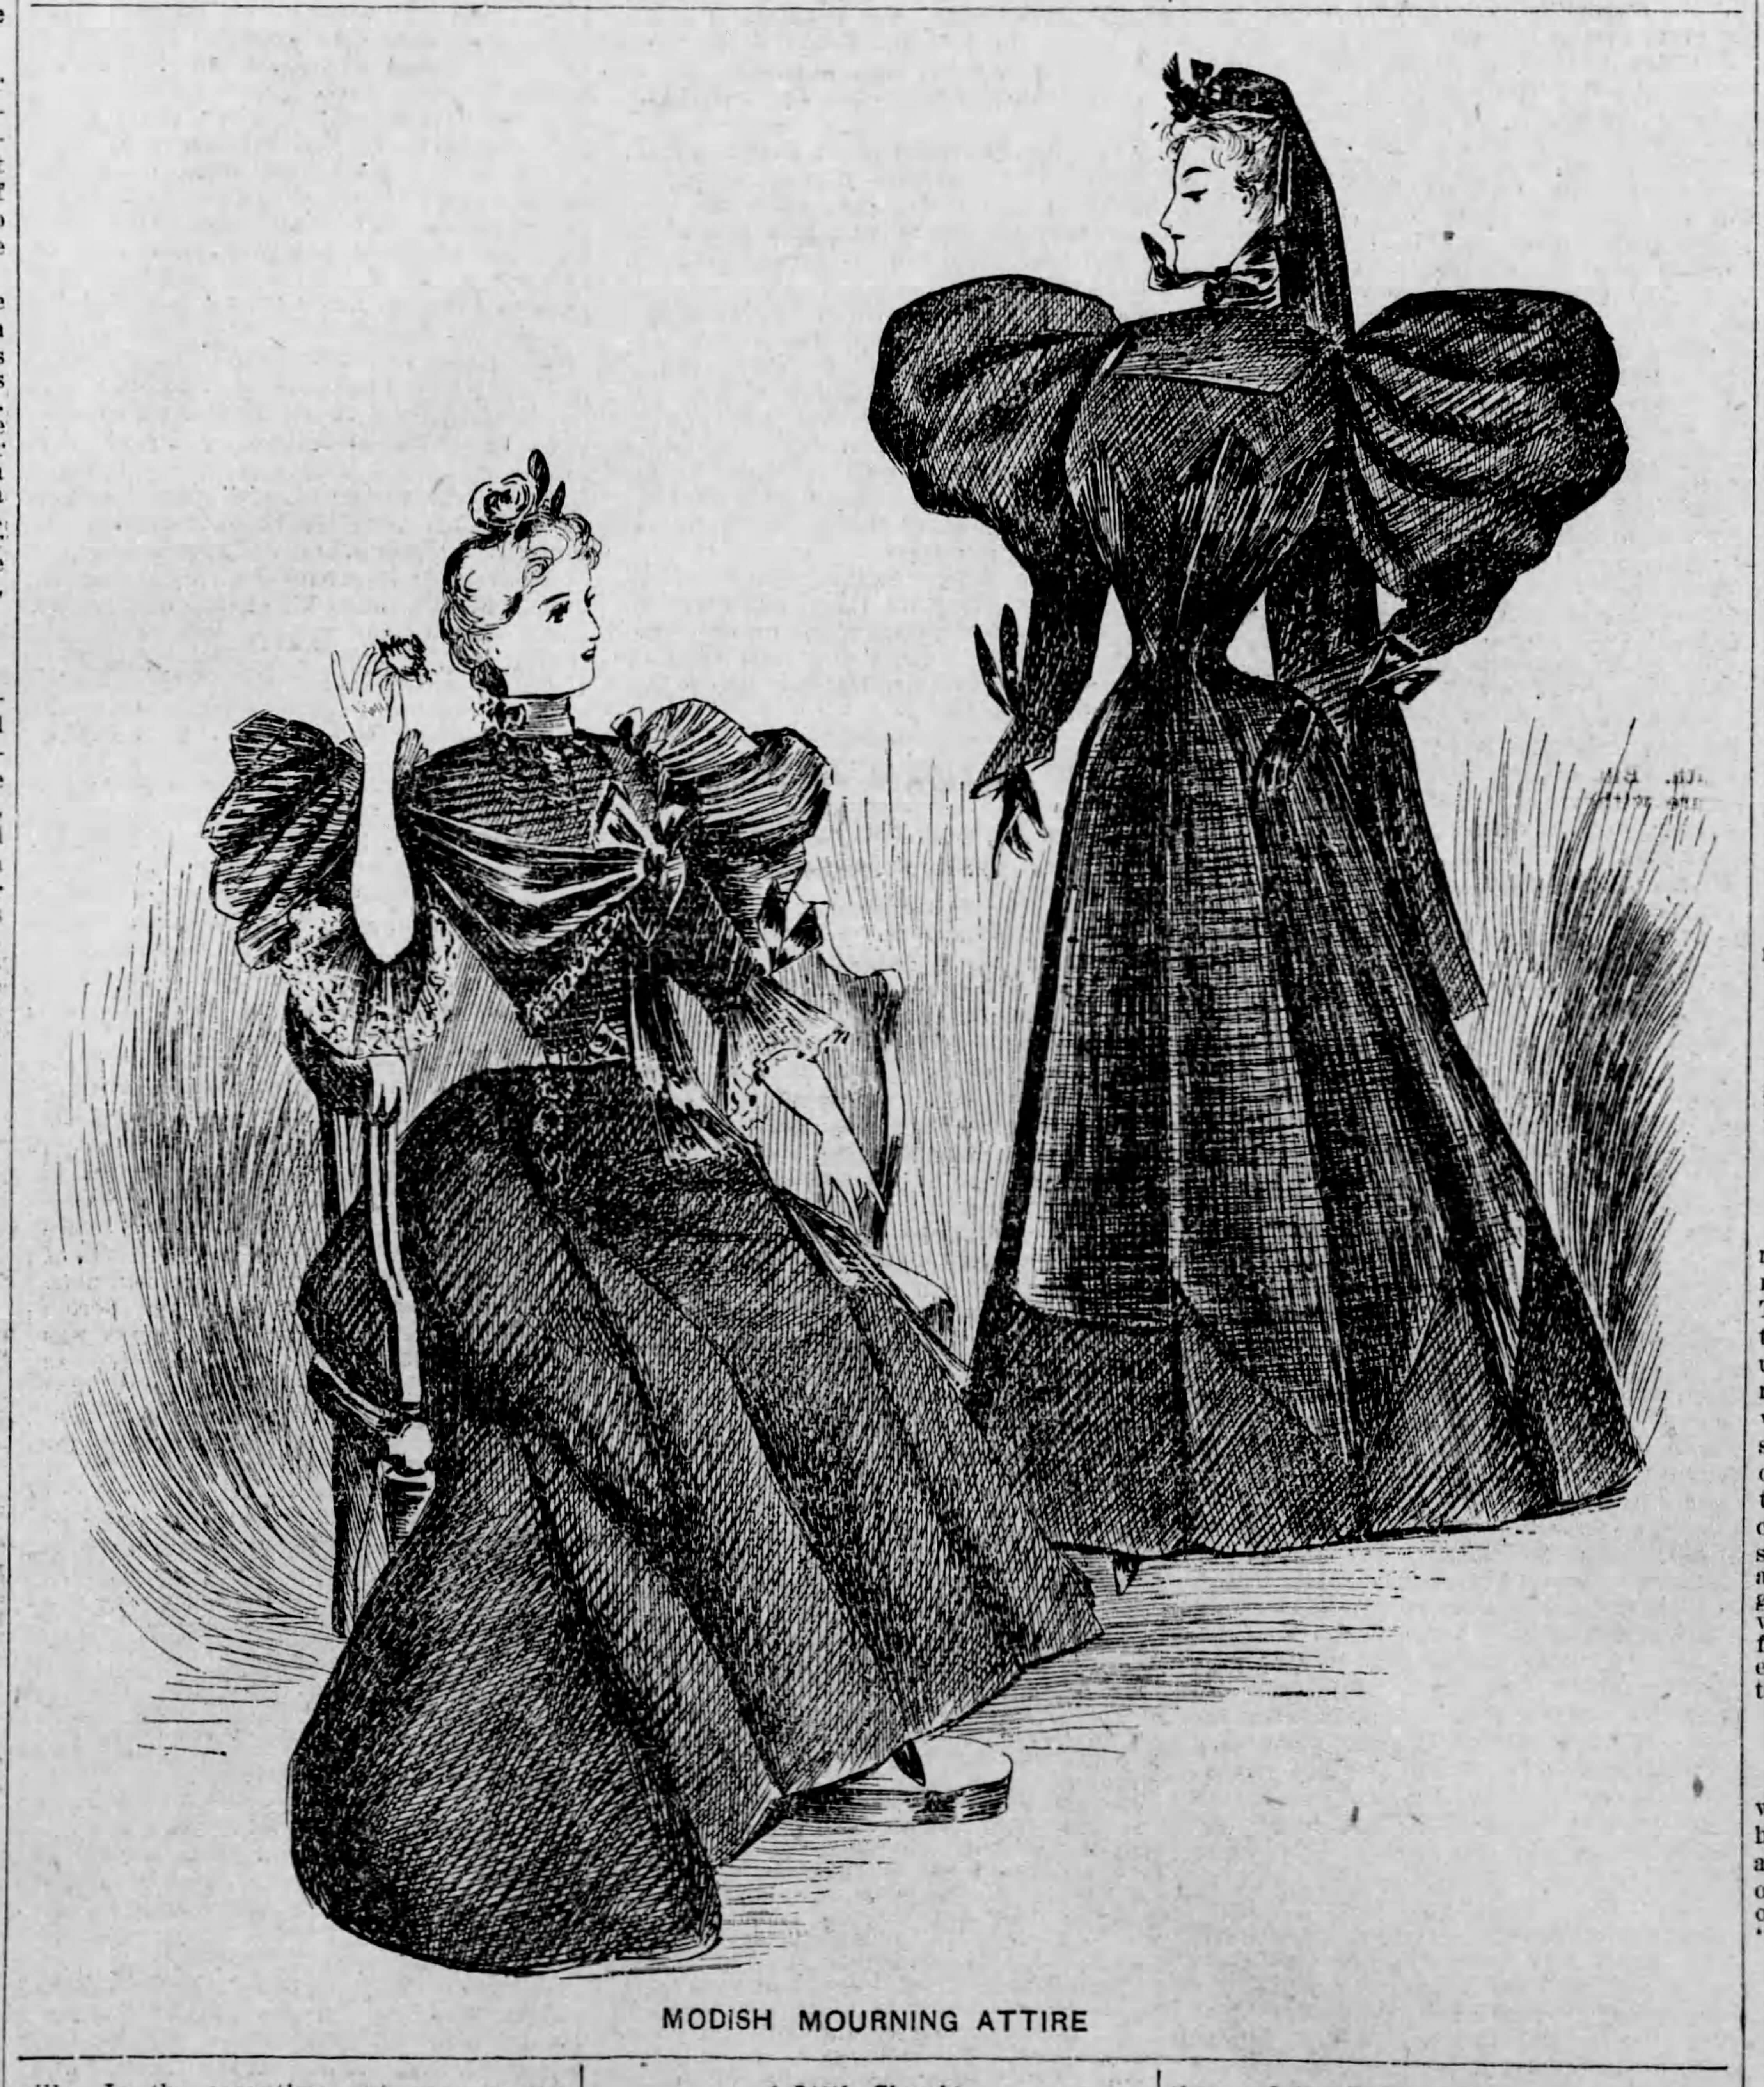 Mourning dress in The Times, Sunday, December 15, 1895